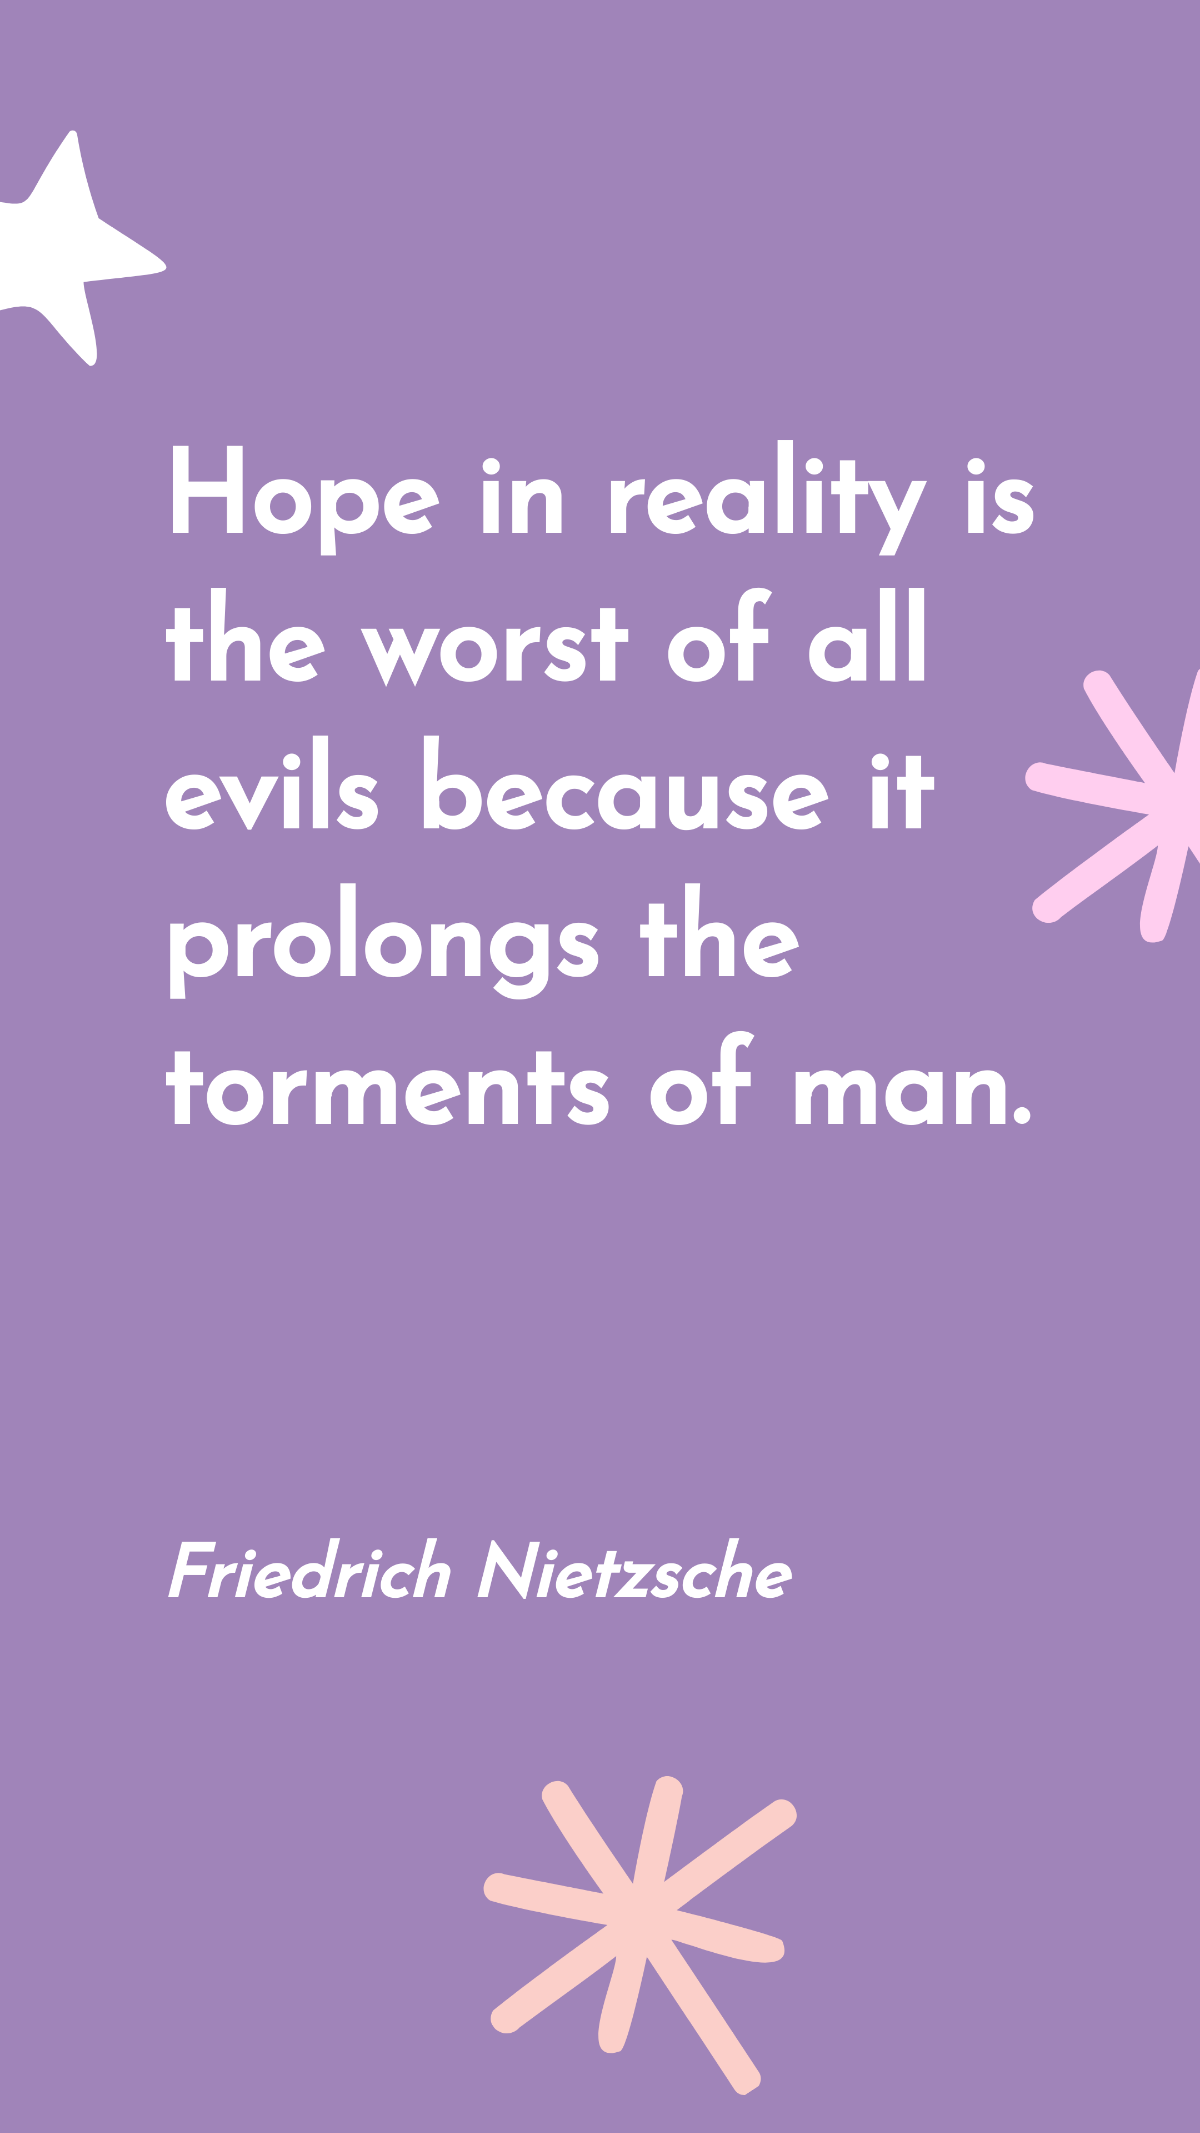 Friedrich Nietzsche - Hope in reality is the worst of all evils because it prolongs the torments of man. Template